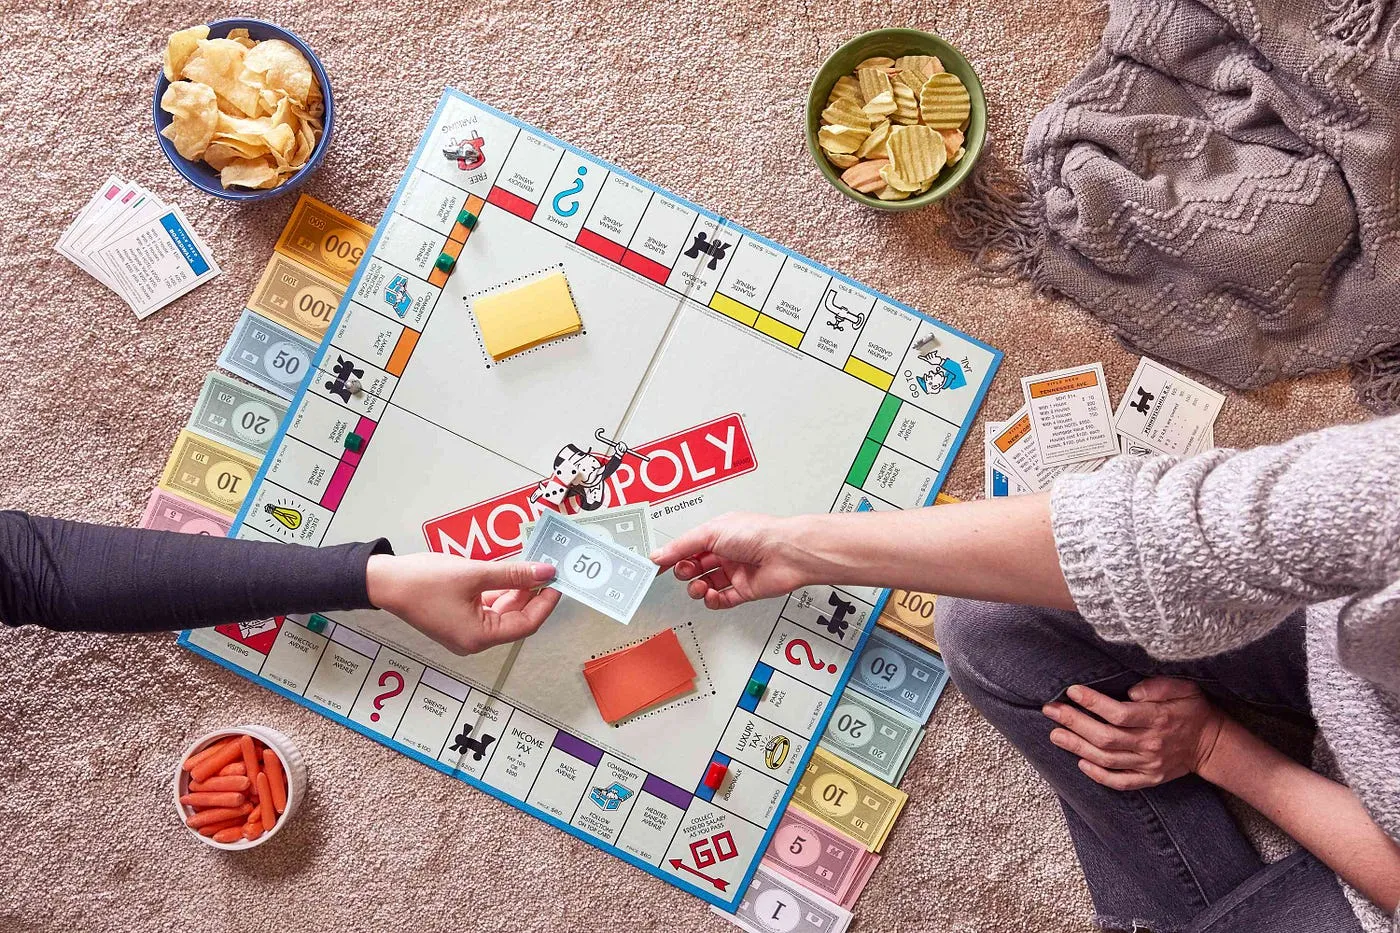 The Official Monopoly Movie Has Been Announced: Margot Robbie Will Produce the Film